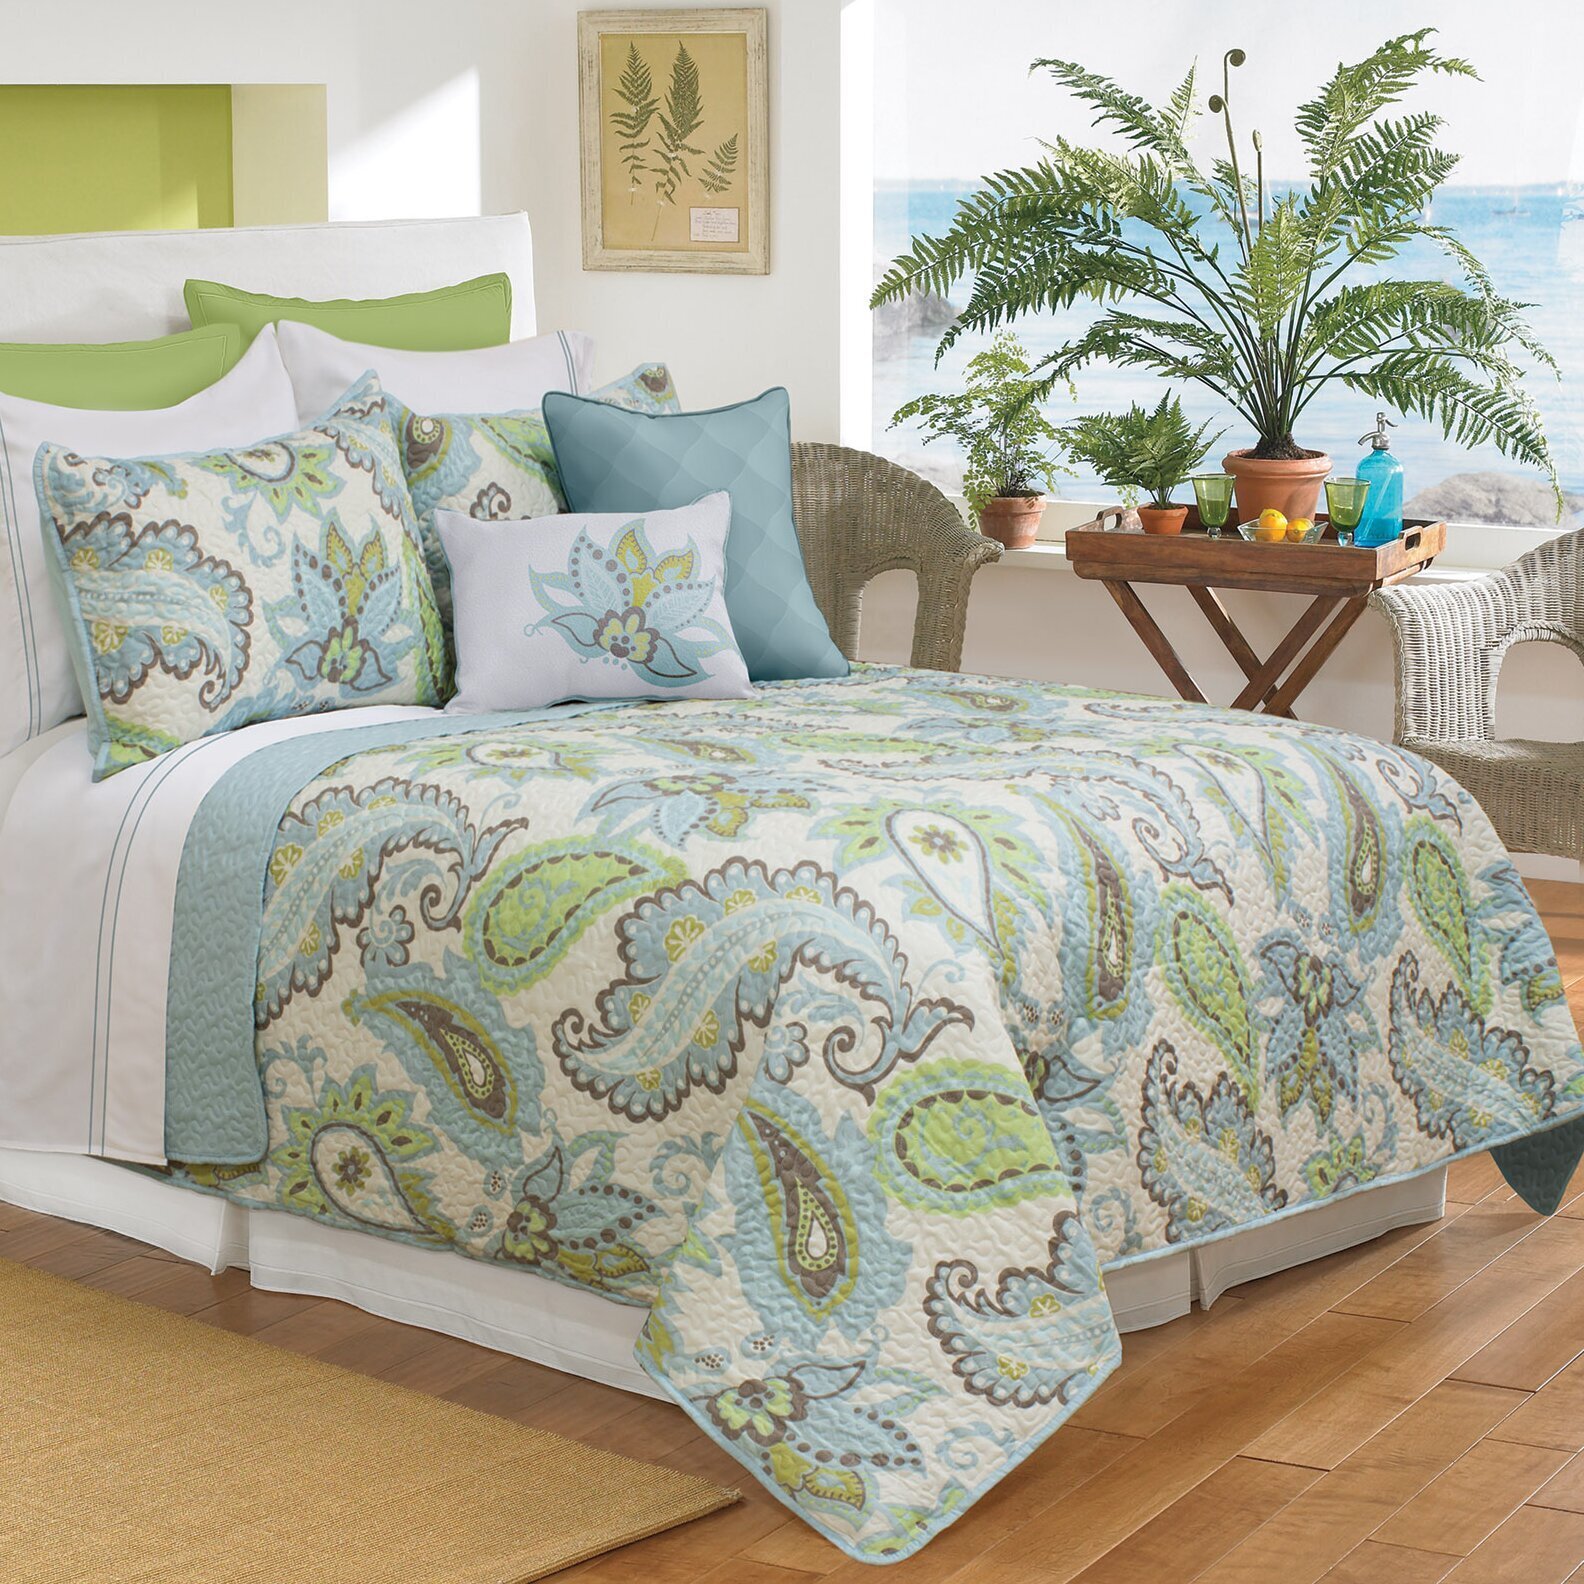 Green Paisley Bedspread Indian Bedding Piilow Set 100% Cotton Bed Cover 